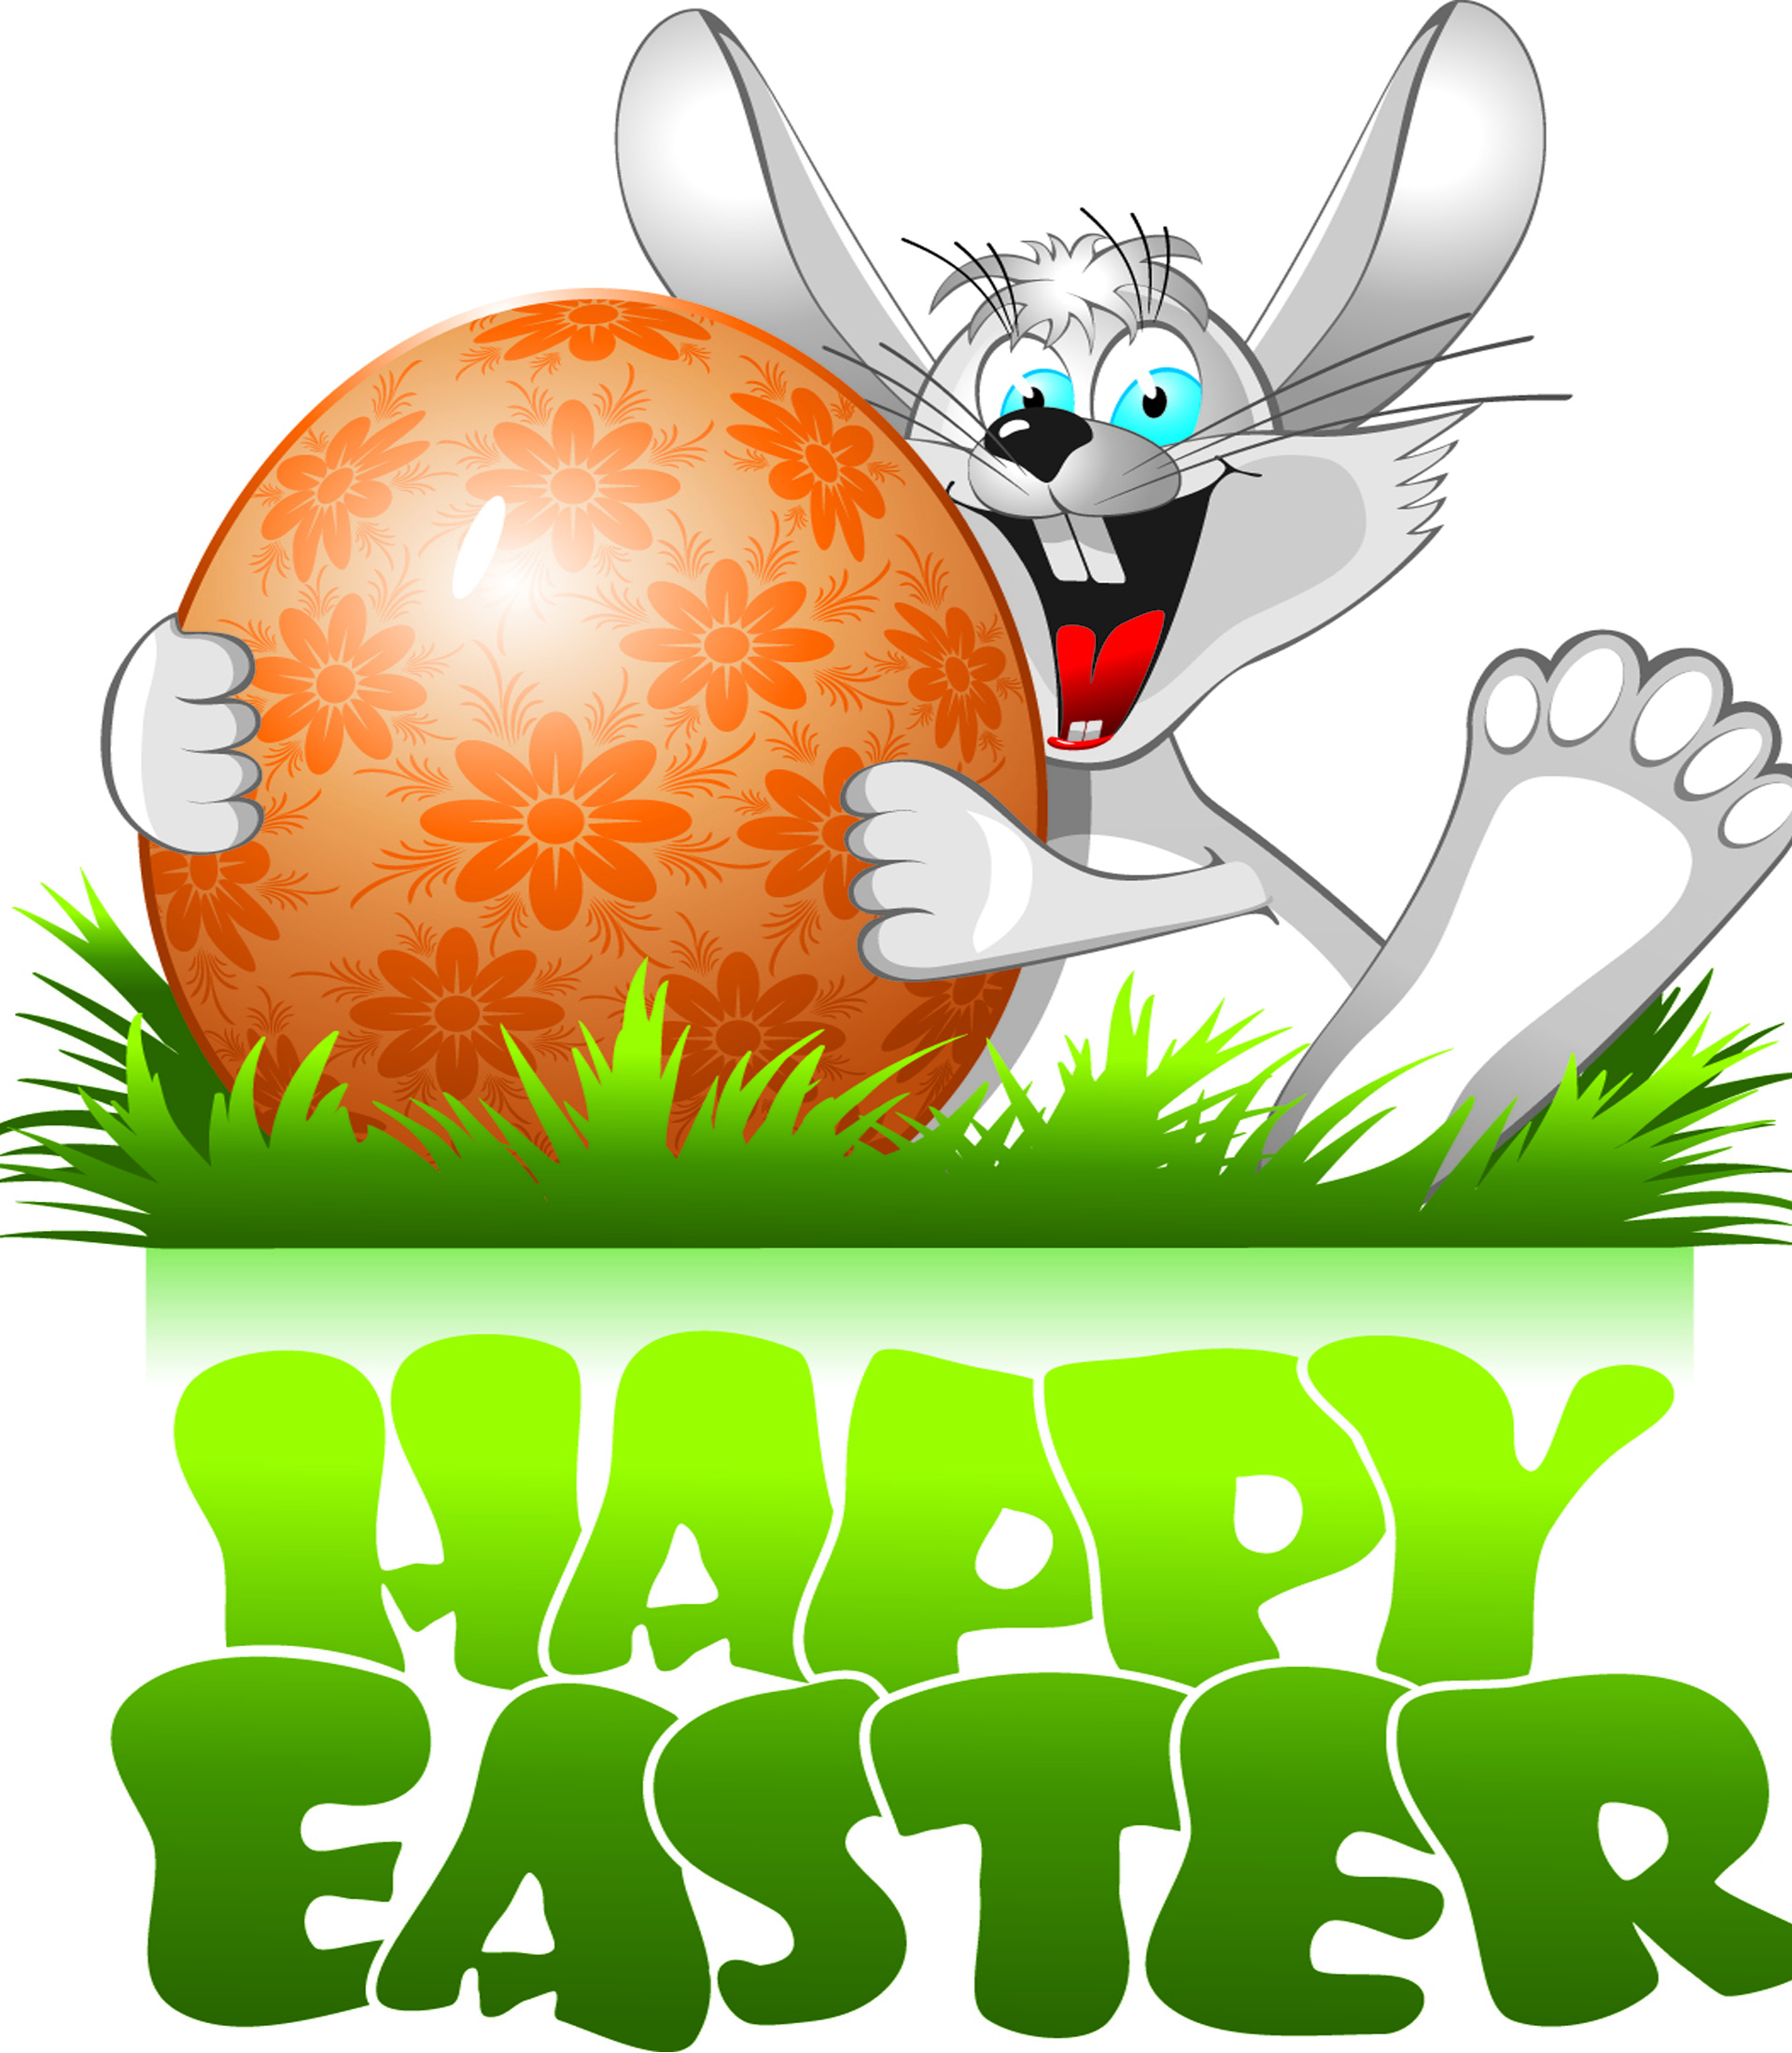 happy easter day hd wallpaper | Free wallpapers